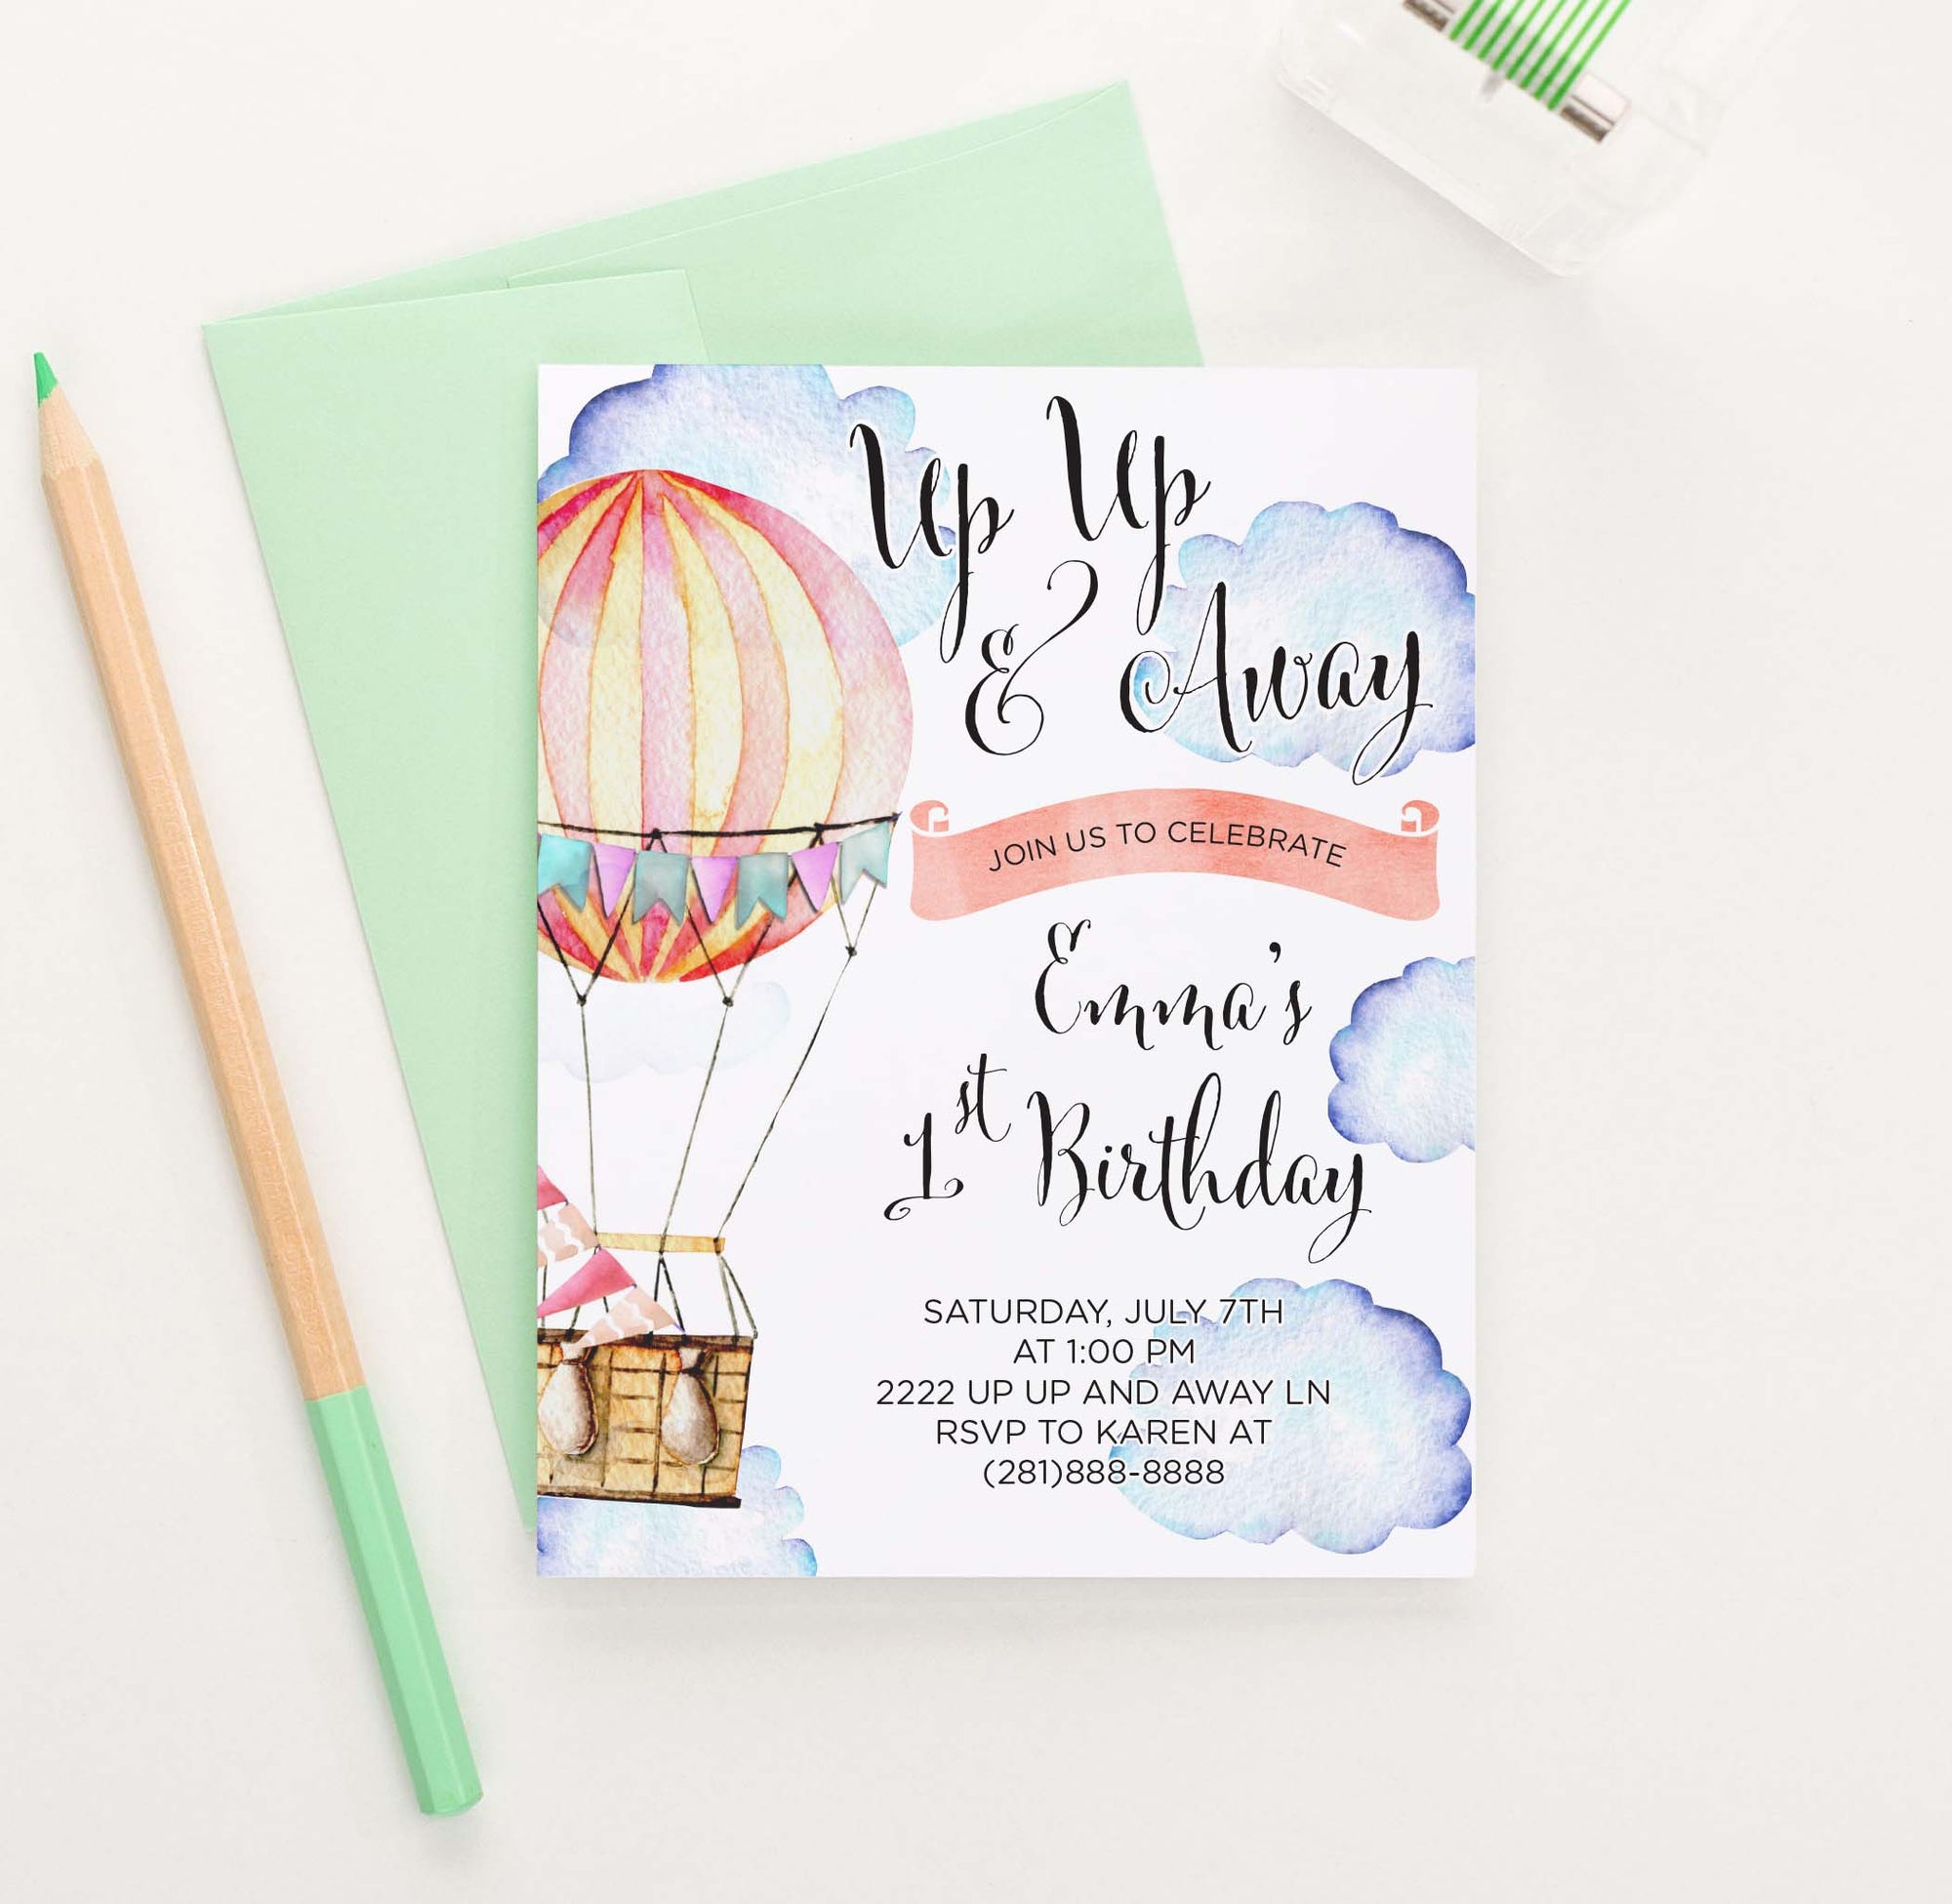 BI108 up up and away birthday party invites with hot air balloon adventure 1